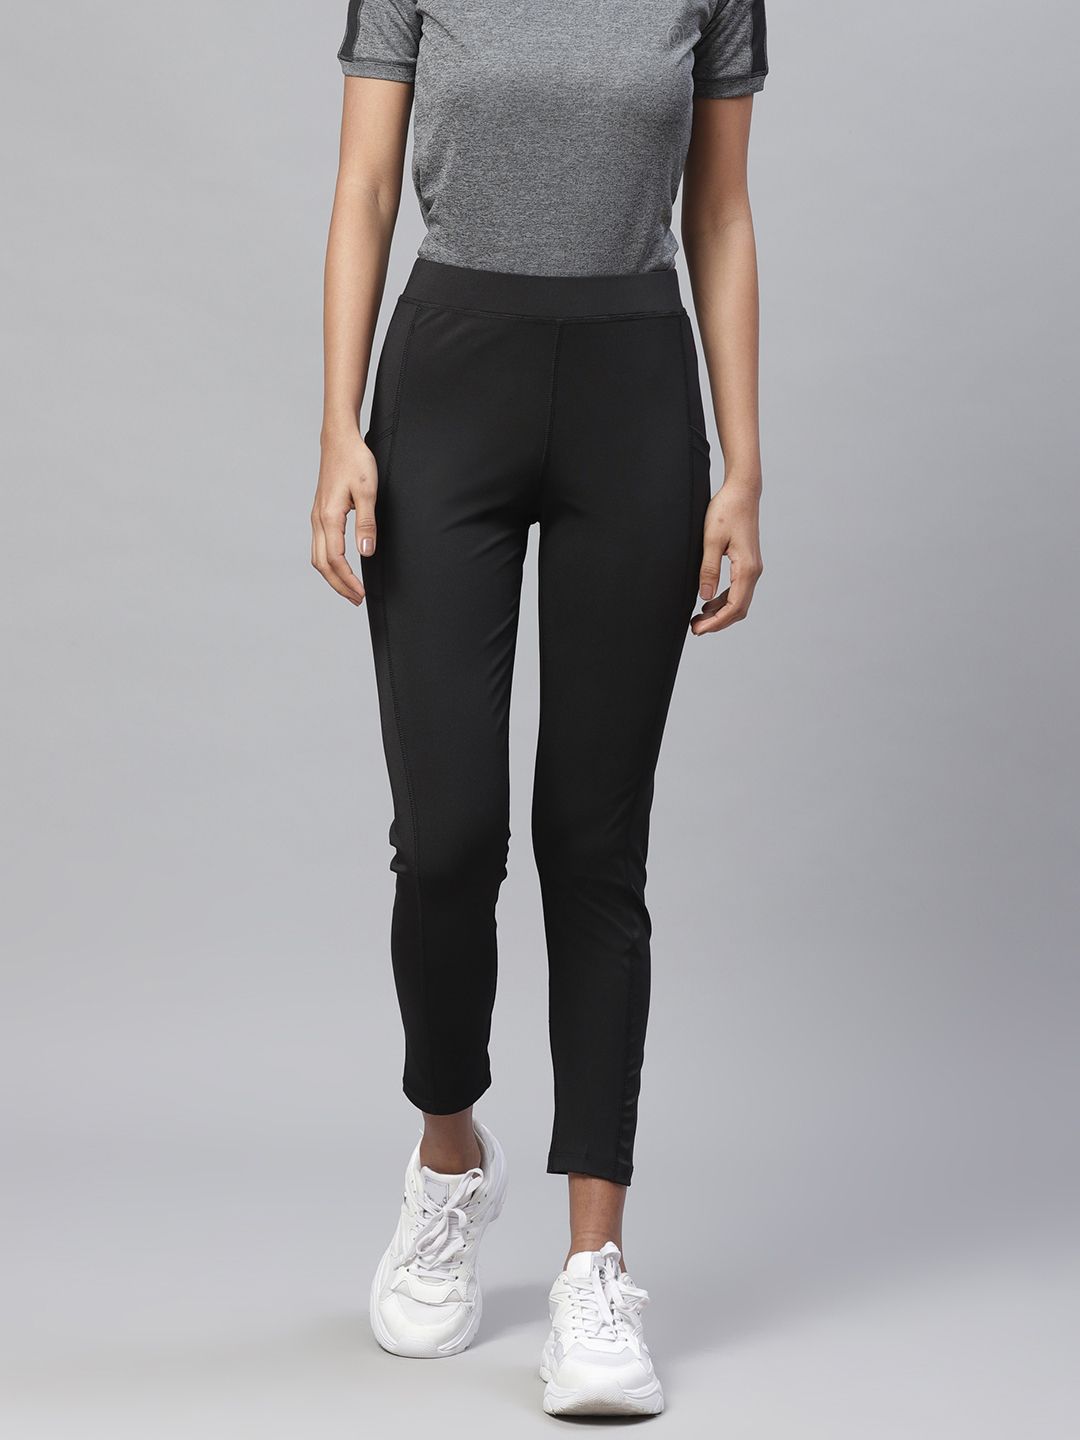 Chkokko Women Black Solid Cropped Yoga Tights Price in India